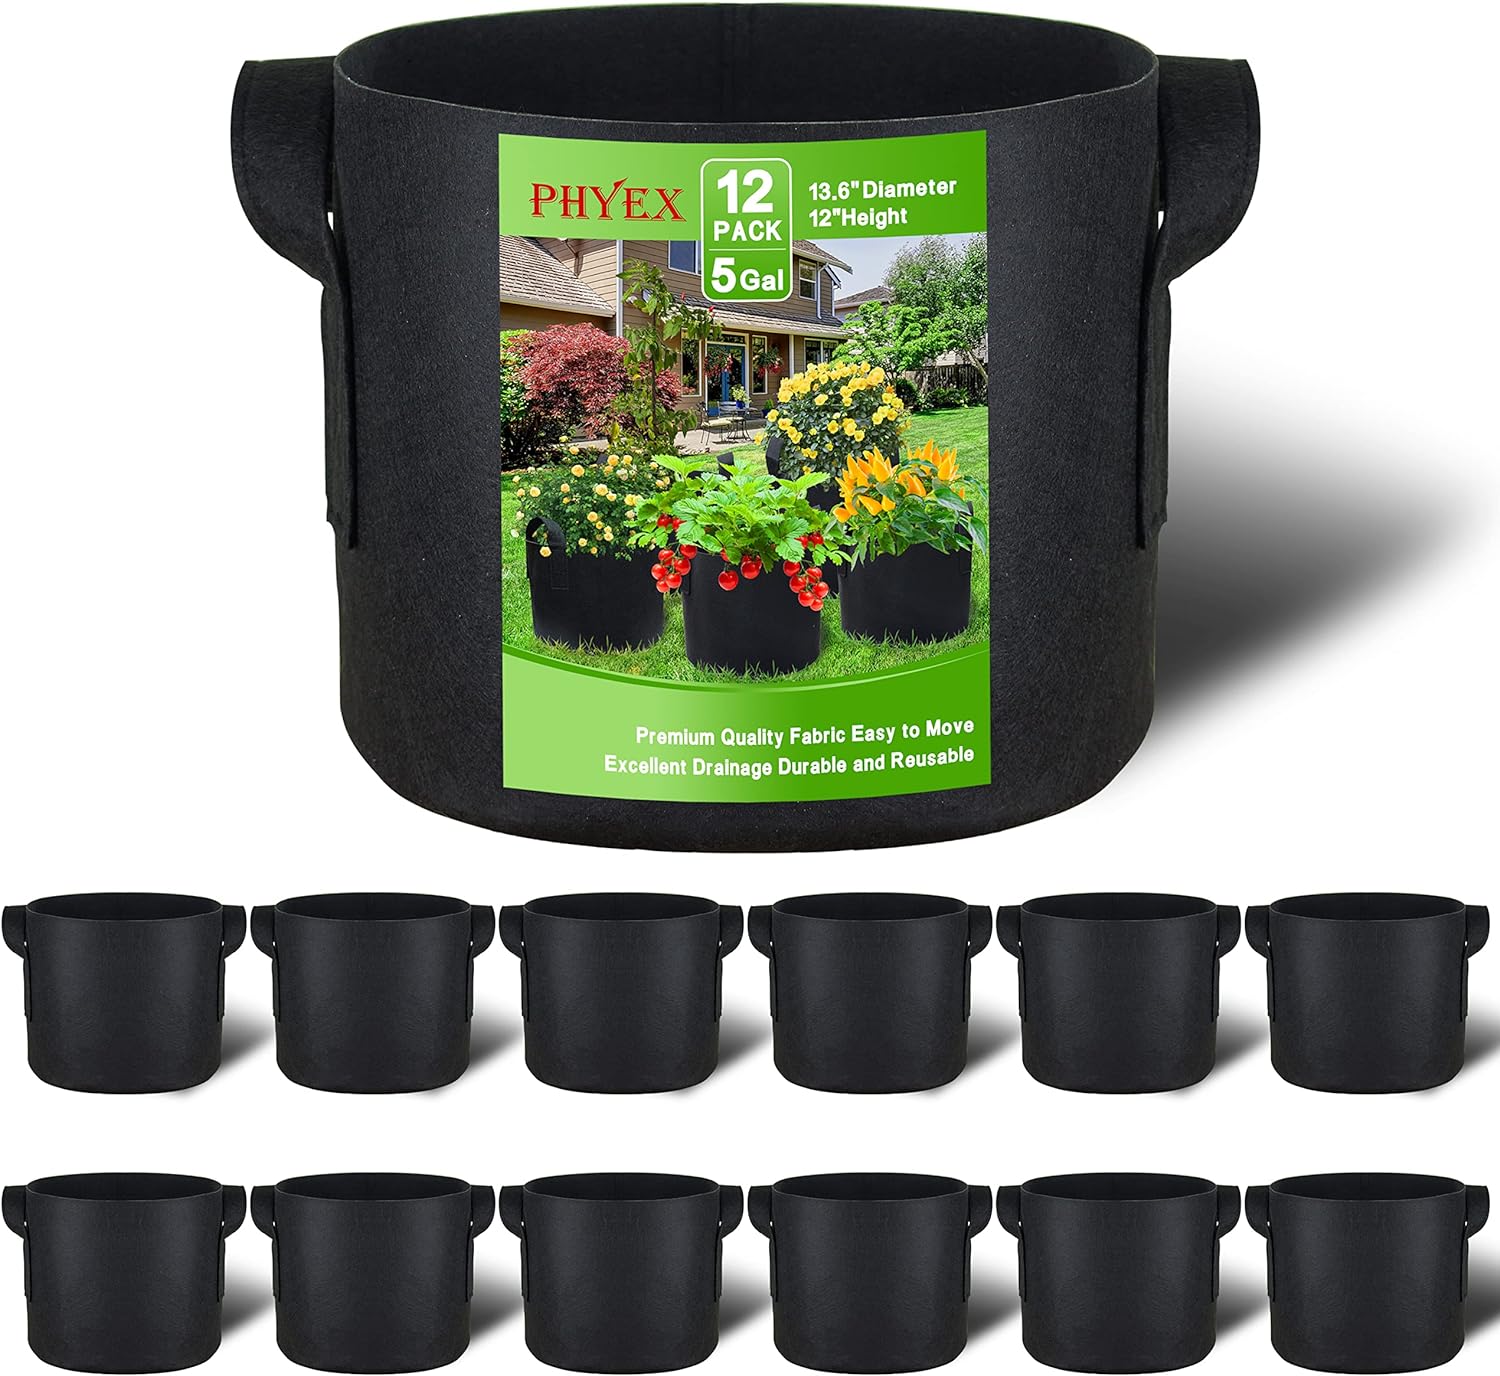 PHYEX 12-Pack 5 Gallon Nonwoven Grow Bags, Aeration Fabric Pots with Durable Handles, Come with 12 Pcs Plant Labels